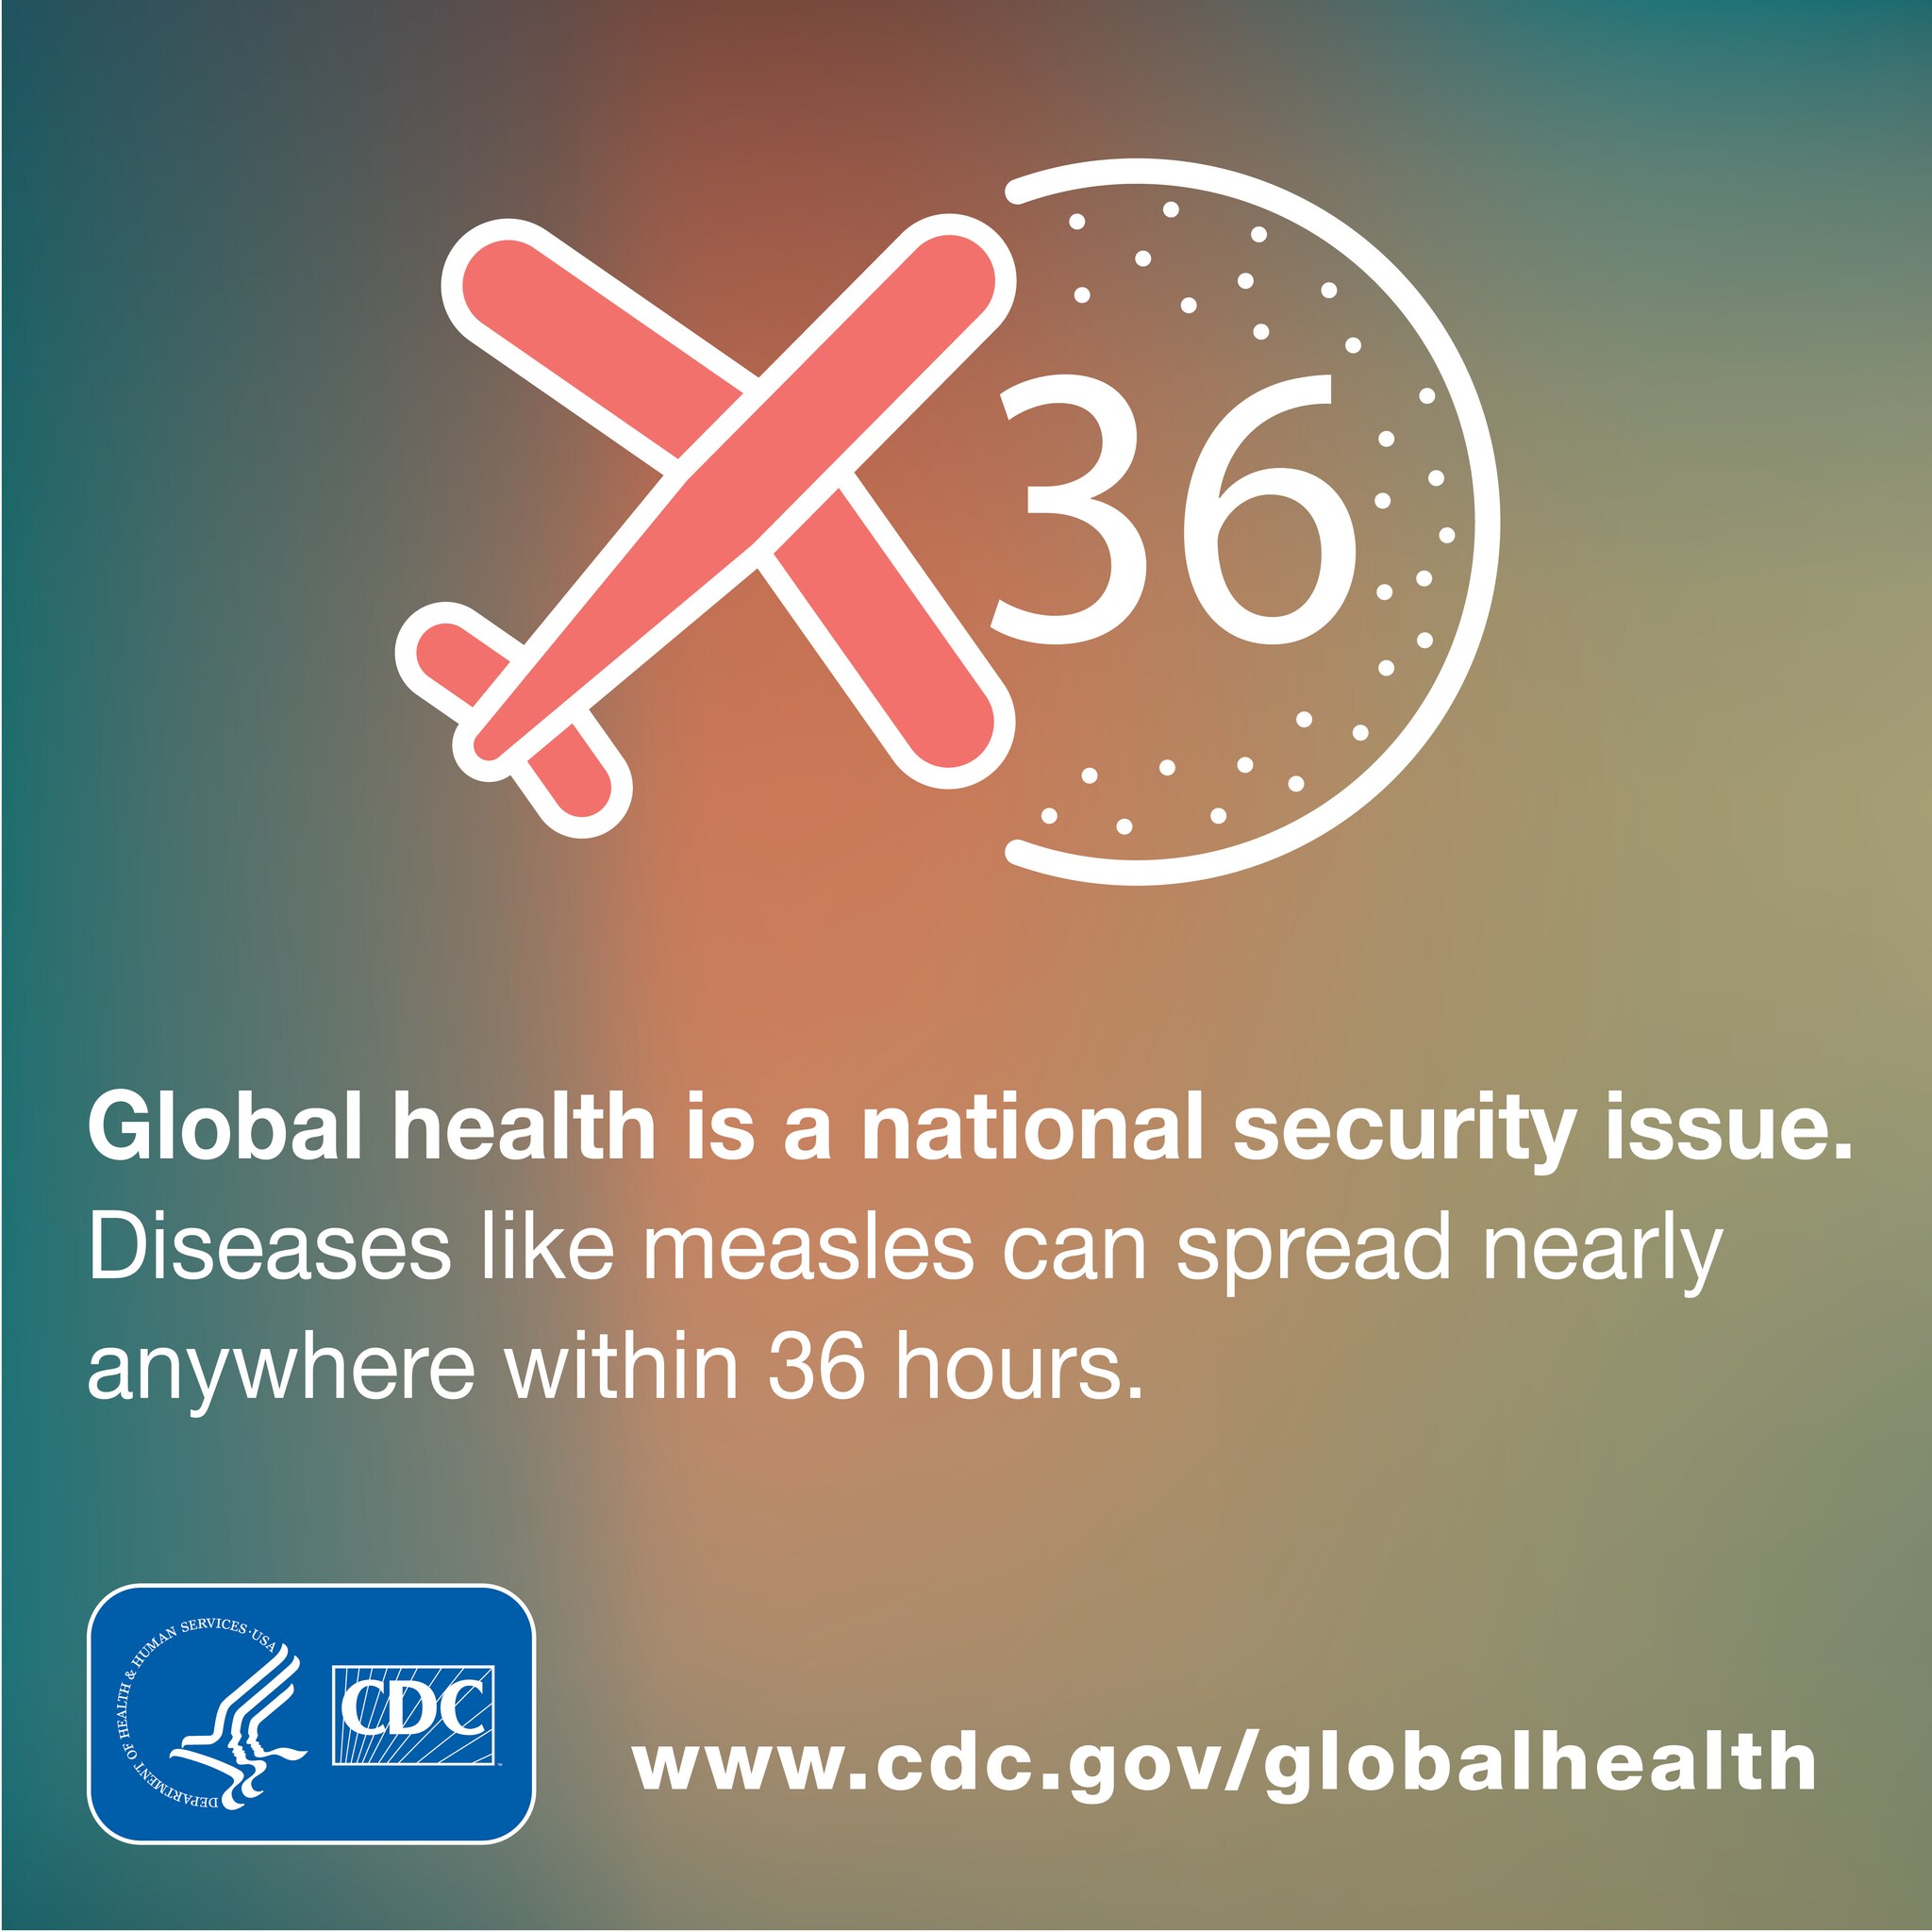 Global health is a national issue. Dieseases like measles can spread nearly anywhere within 36 hours. www.cdc.gov/globalhealth